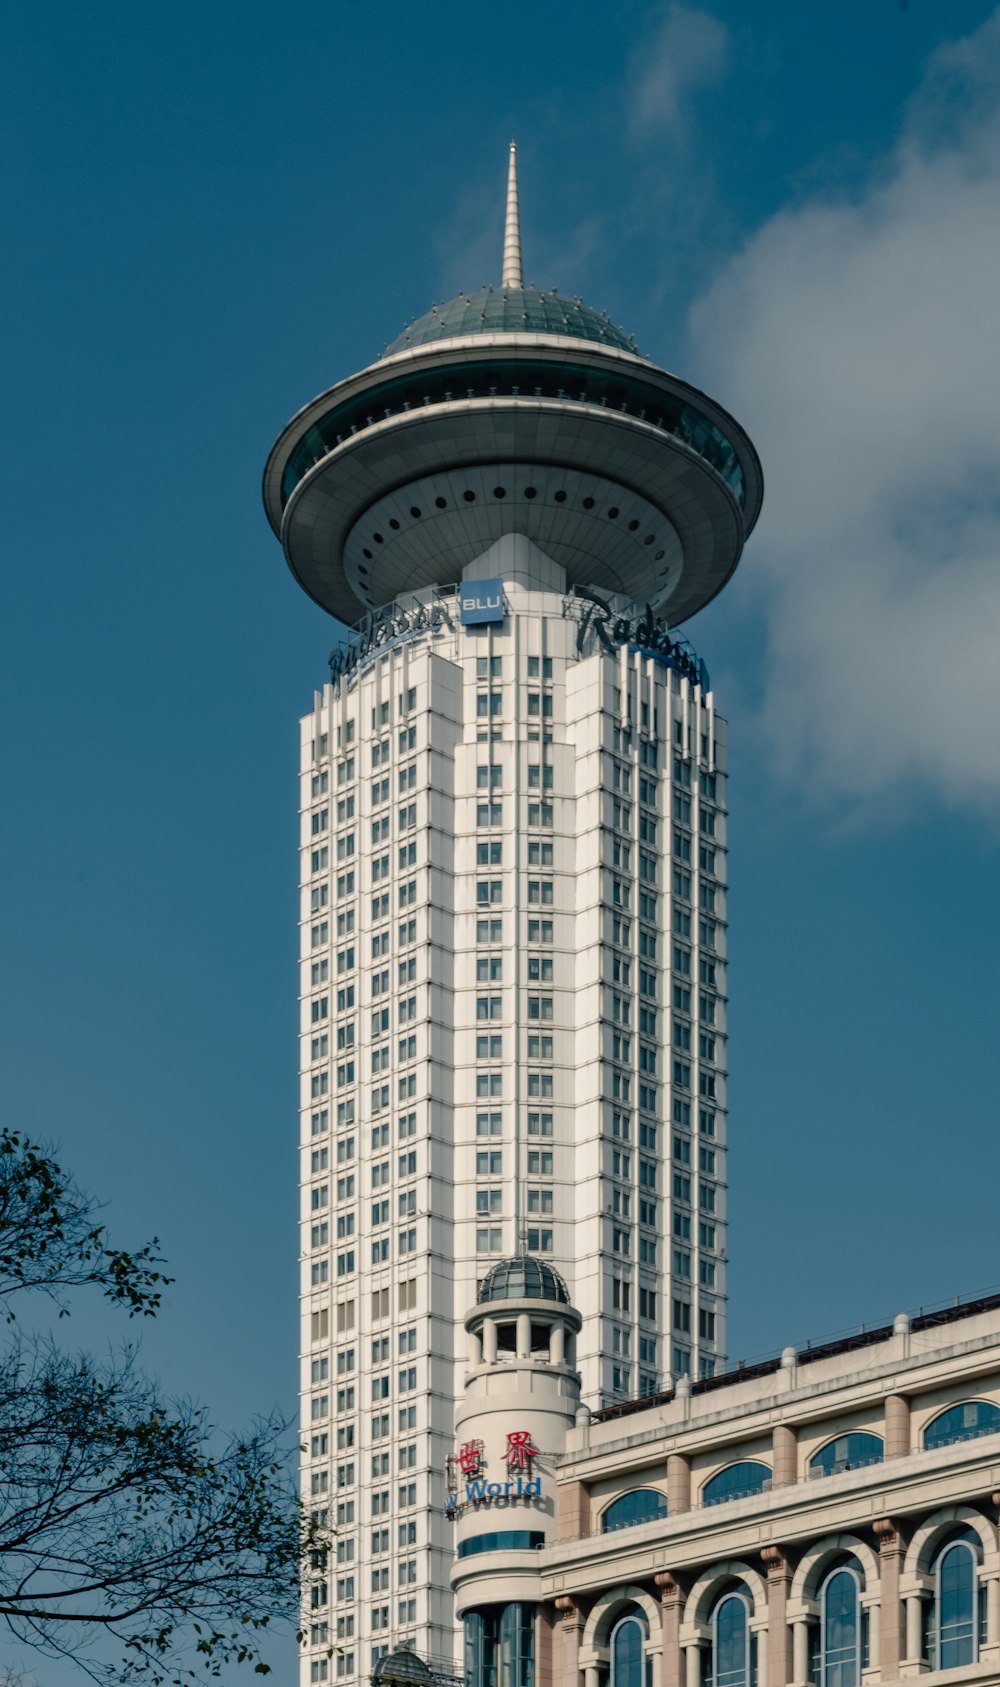 a tall white building with a sky scraper in the background